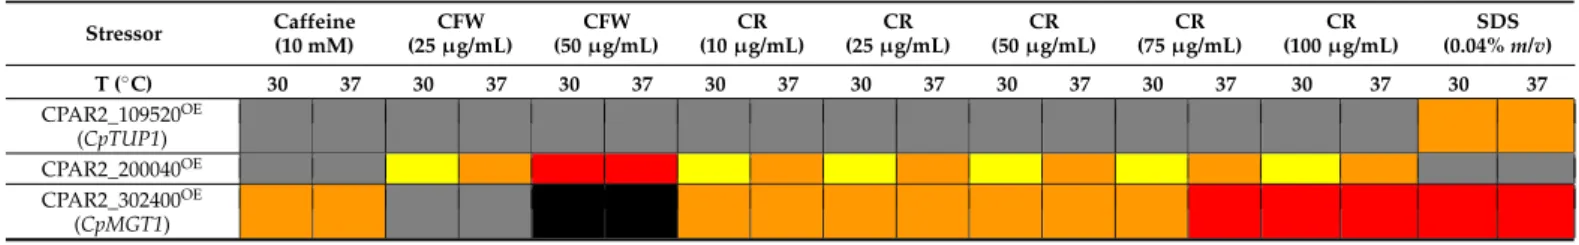 Table 2. The heat map shows the results of the spot assay analyses (CFW—Calcofluor white; CR—Congo red; black—no growth; red—strong defect; orange—medium defect; yellow—slight defect; grey—no difference).